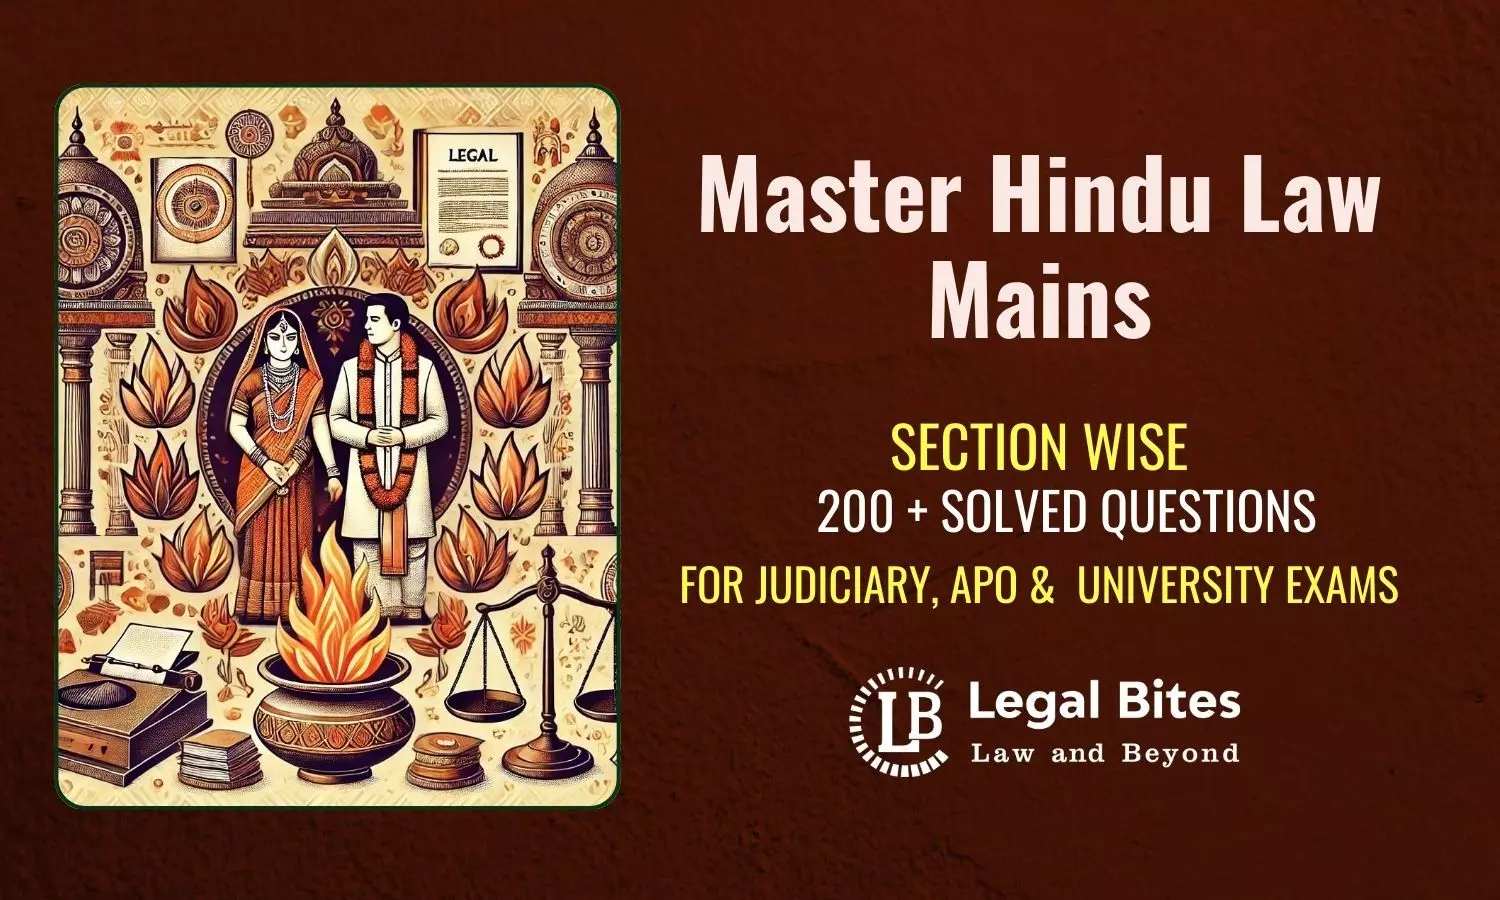 Master Hindu Law Mains: Legal Bites Hindu Law Solved Questions Series for Judiciary, APO & University Exams